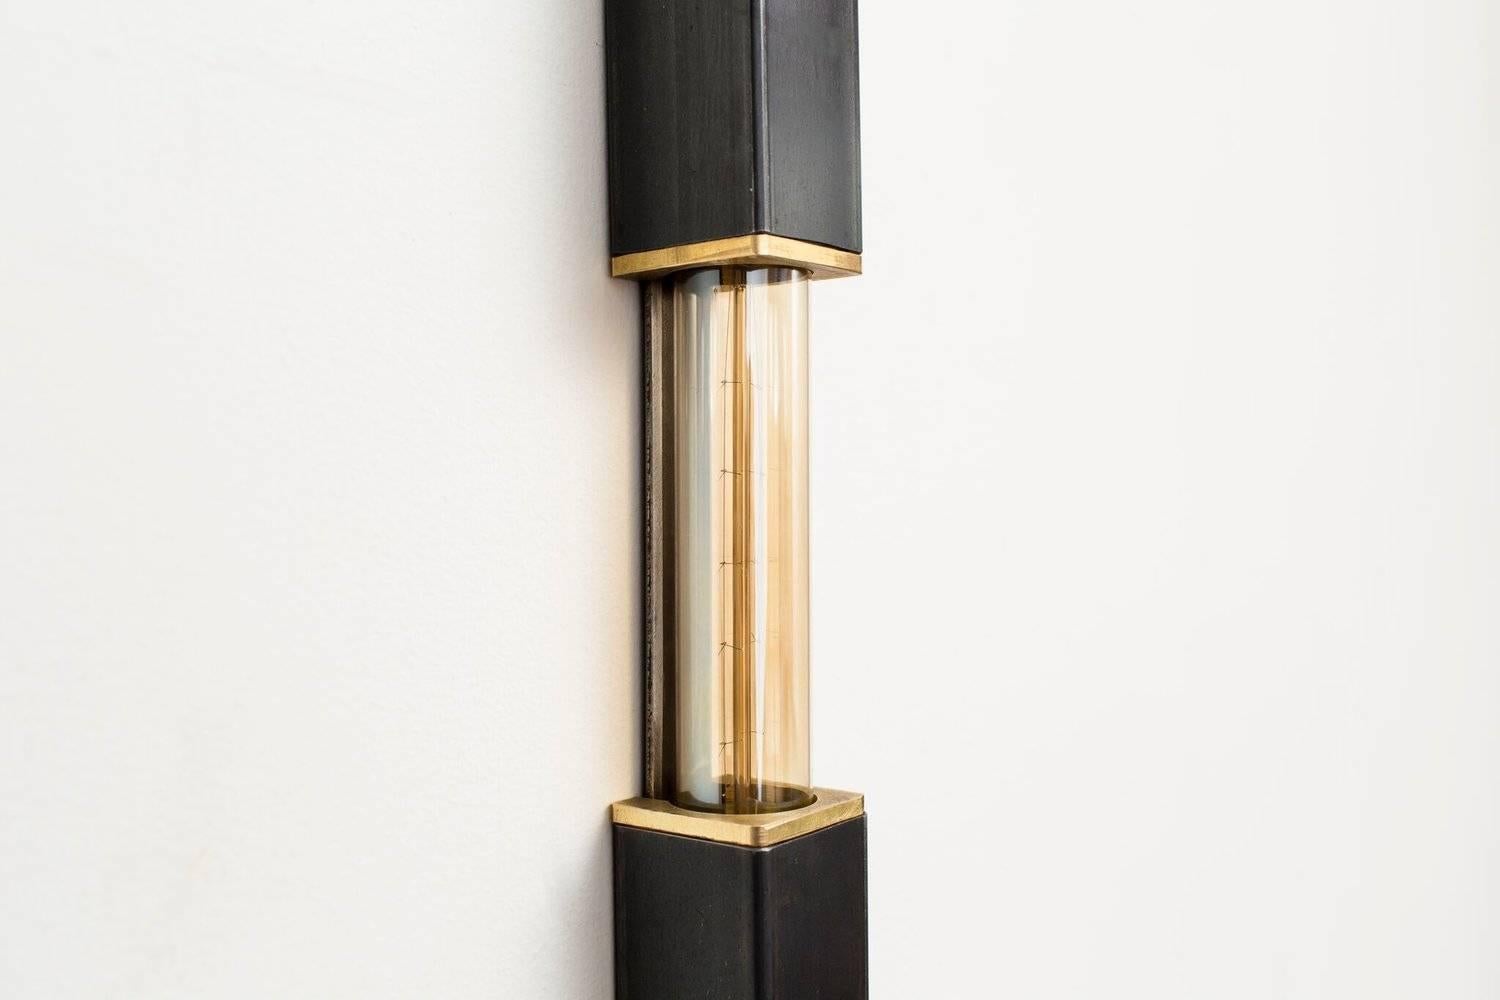 Daikon Studio / Mini Stilk Sconce

Transporting in its simplicity, the Mini Stilk Sconce energizes any room through its powerfully collaborative nature, making it uniquely suited to myriad styles of architecture. Meticulously crafted by hand in our